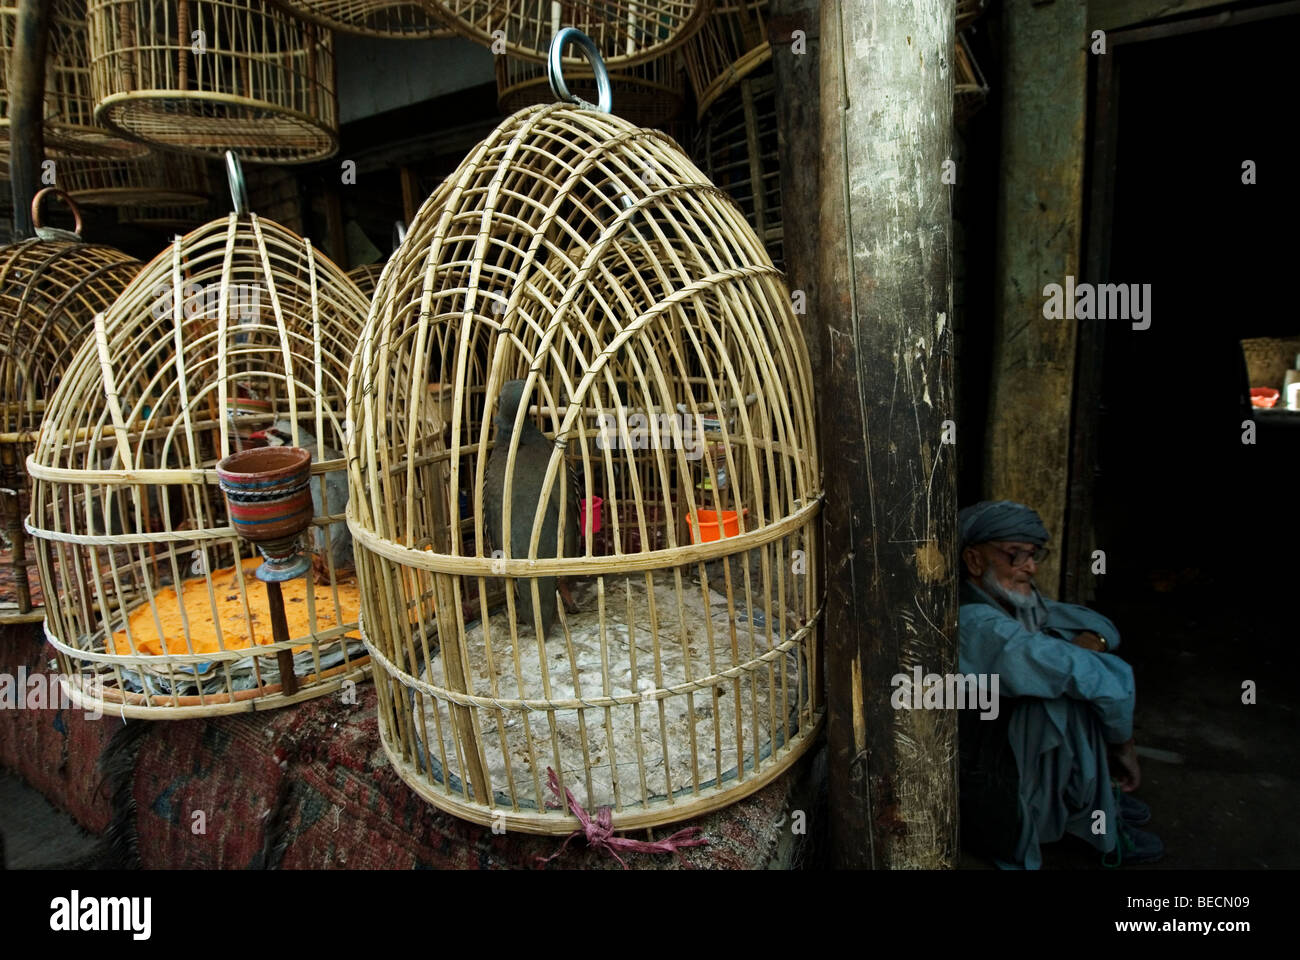 Kabul, Afghanistan. Bird market. Cages hanging up and man sitting on the ground. Stock Photo